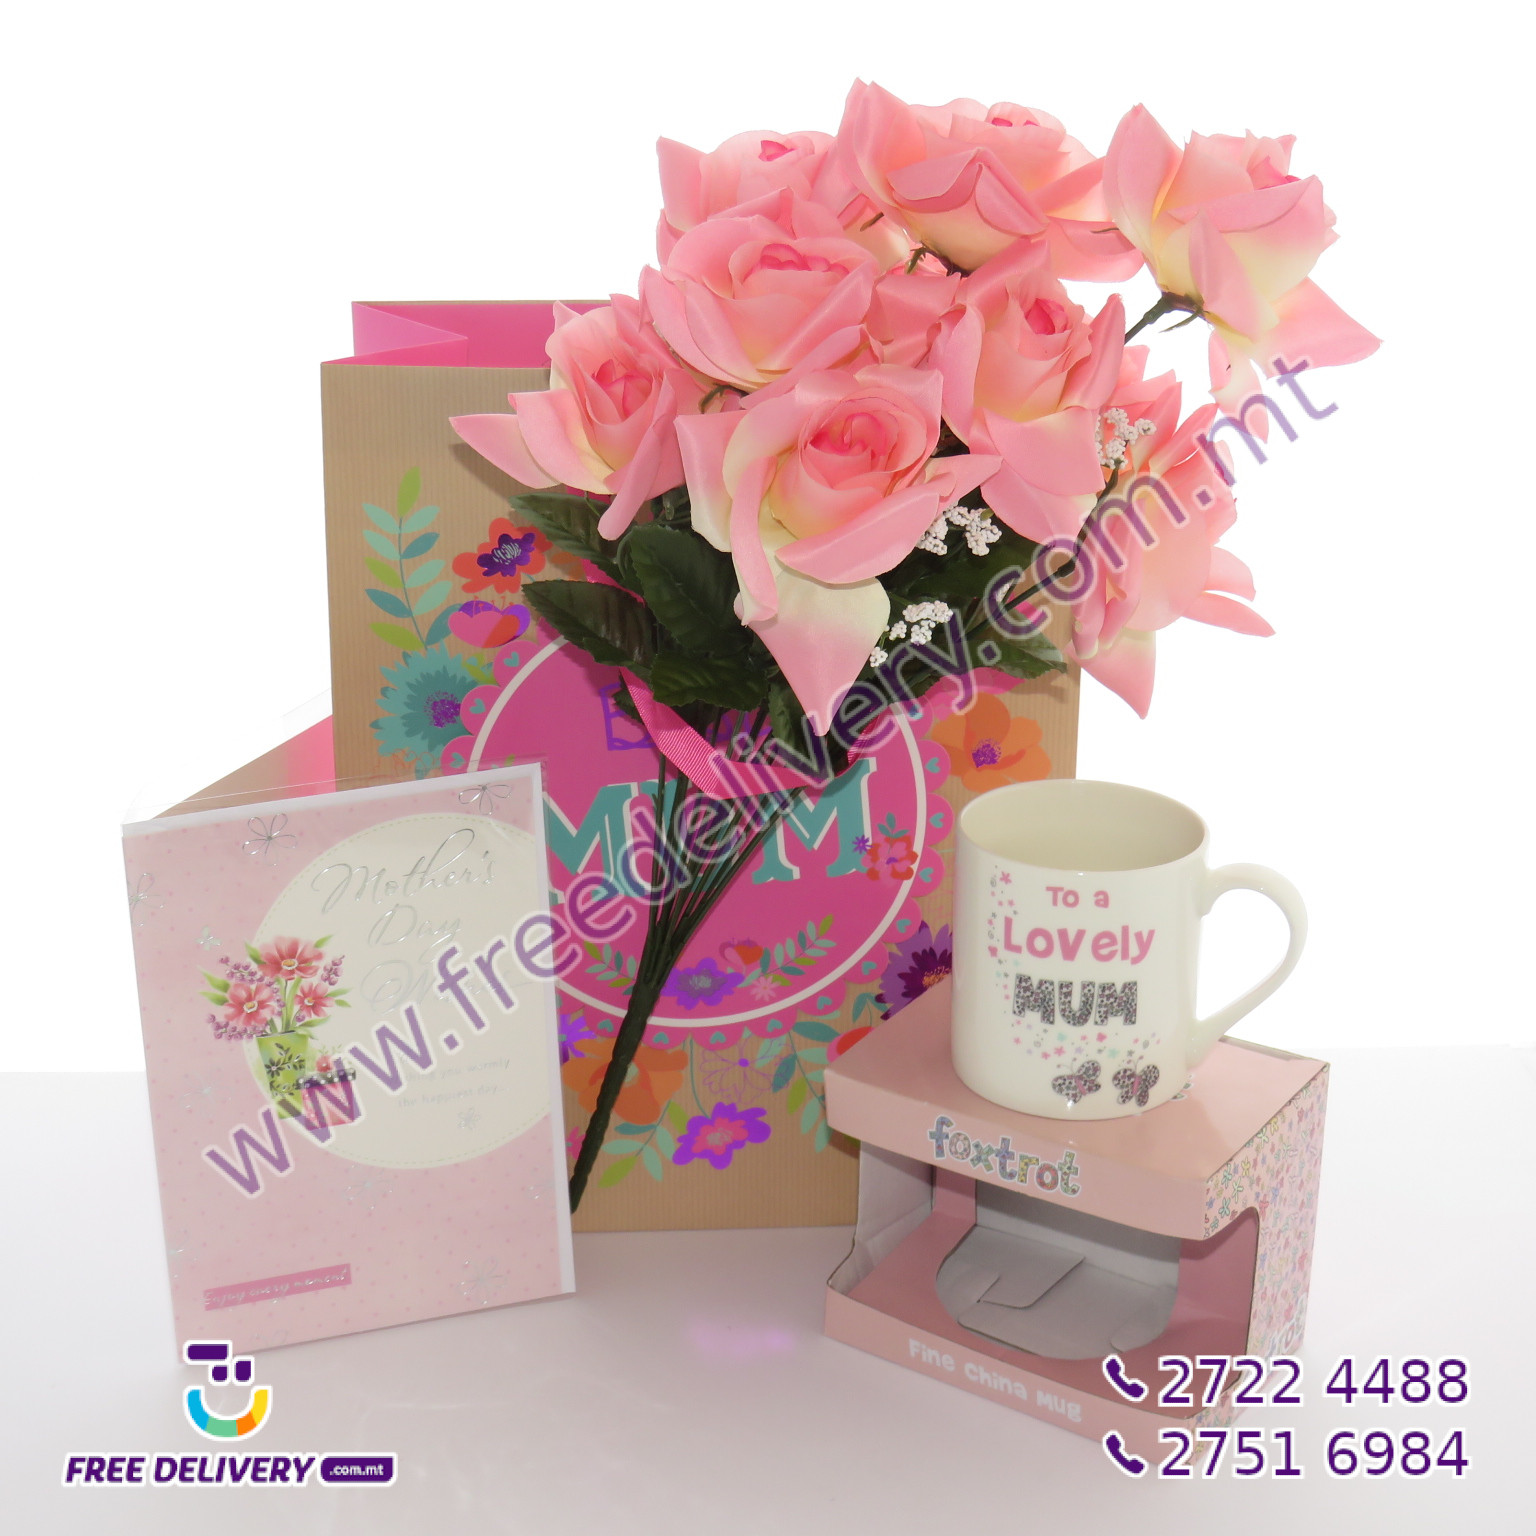 PINK ROSES MOTHER’S DAY GIFT PACKAGE